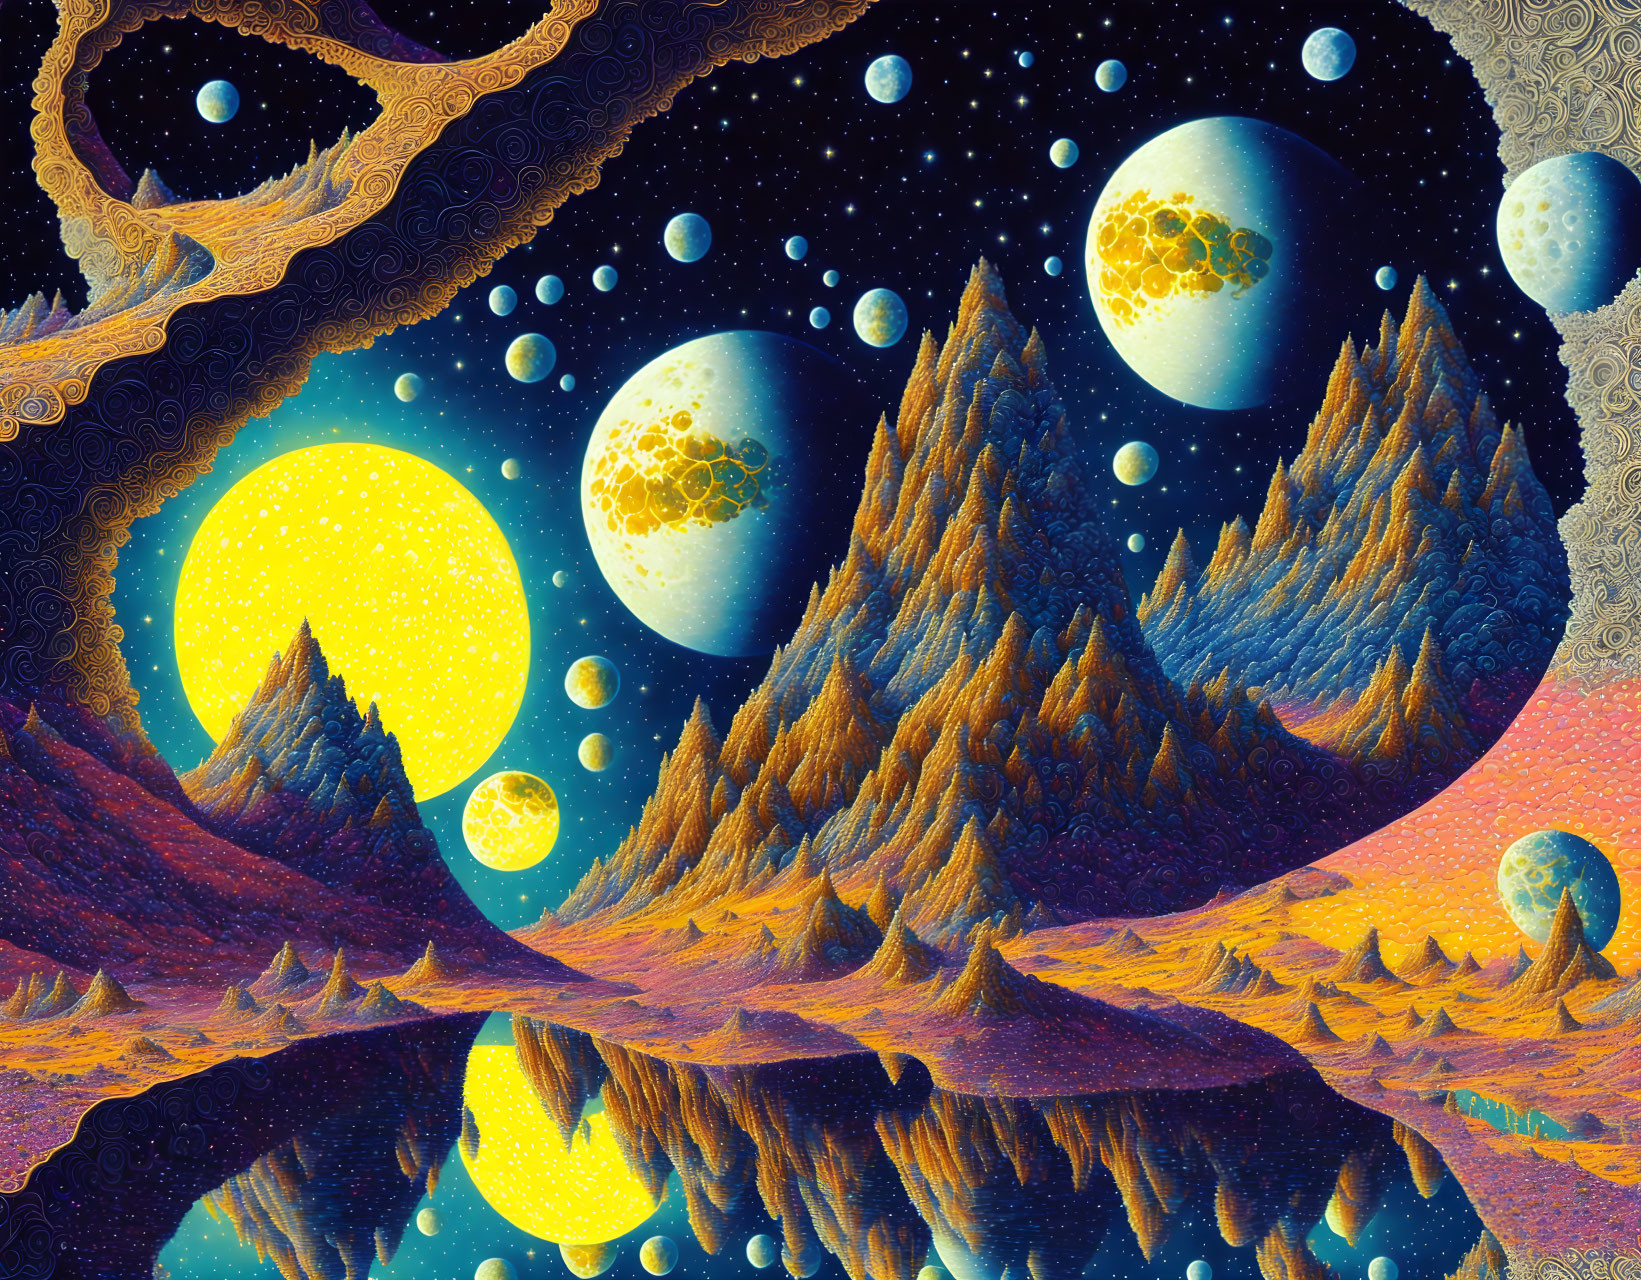 Vibrant surreal landscape with multiple moons and mirrored terrain